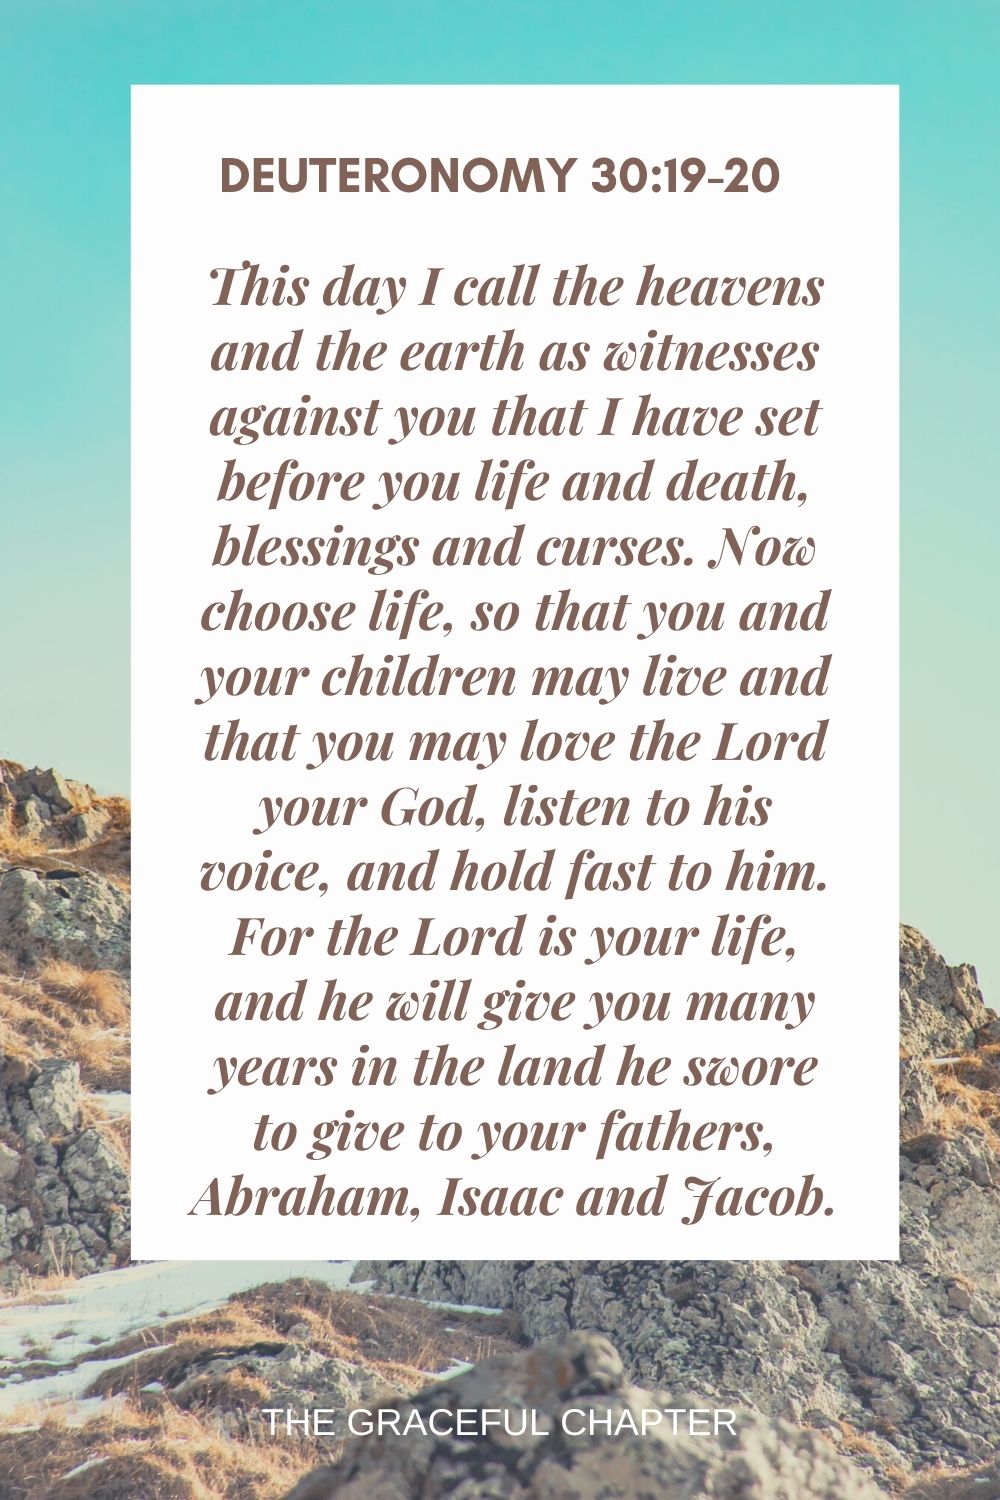 This day I call the heavens and the earth as witnesses against you that I have set before you life and death, blessings and curses. Now choose life, so that you and your children may live and that you may love the Lord your God, listen to his voice, and hold fast to him. For the Lord is your life, and he will give you many years in the land he swore to give to your fathers, Abraham, Isaac and Jacob. Deuteronomy 30:19-20